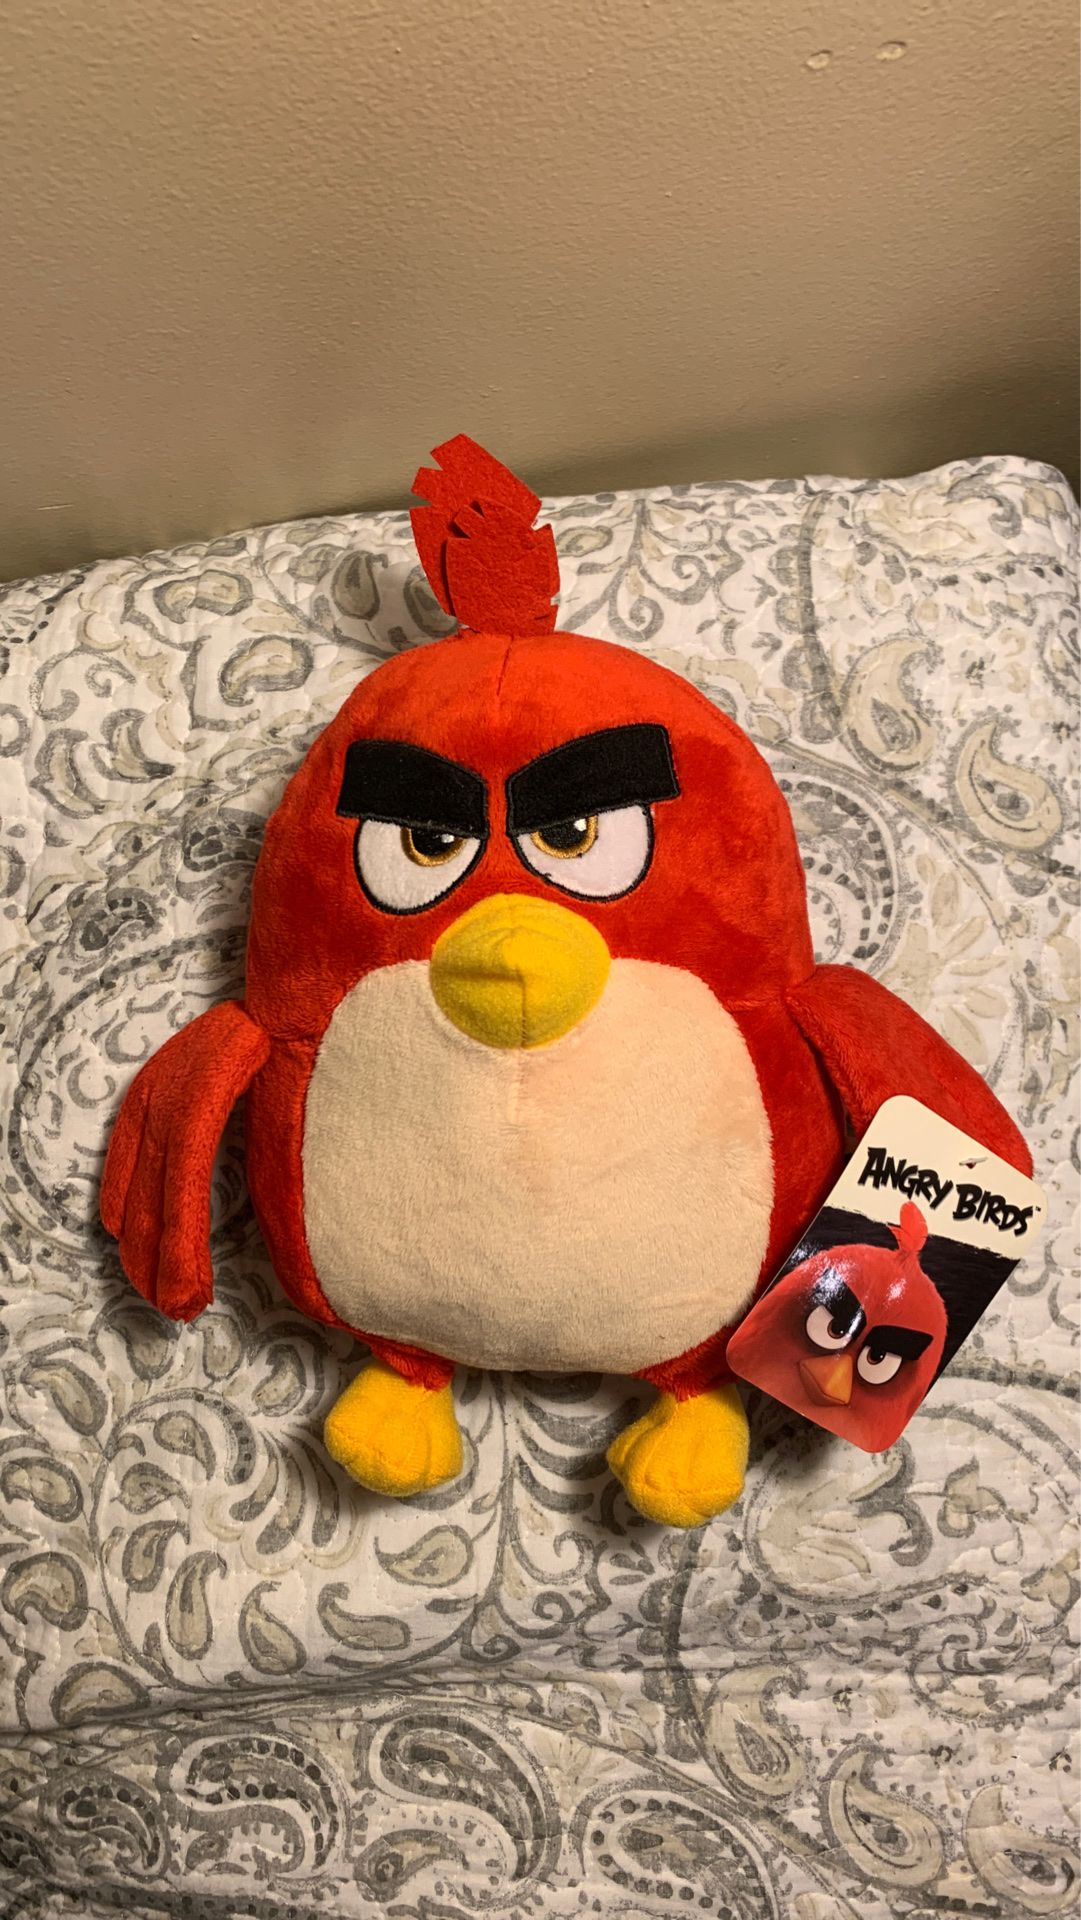 Red Angry Birds plushie , stuffed animal